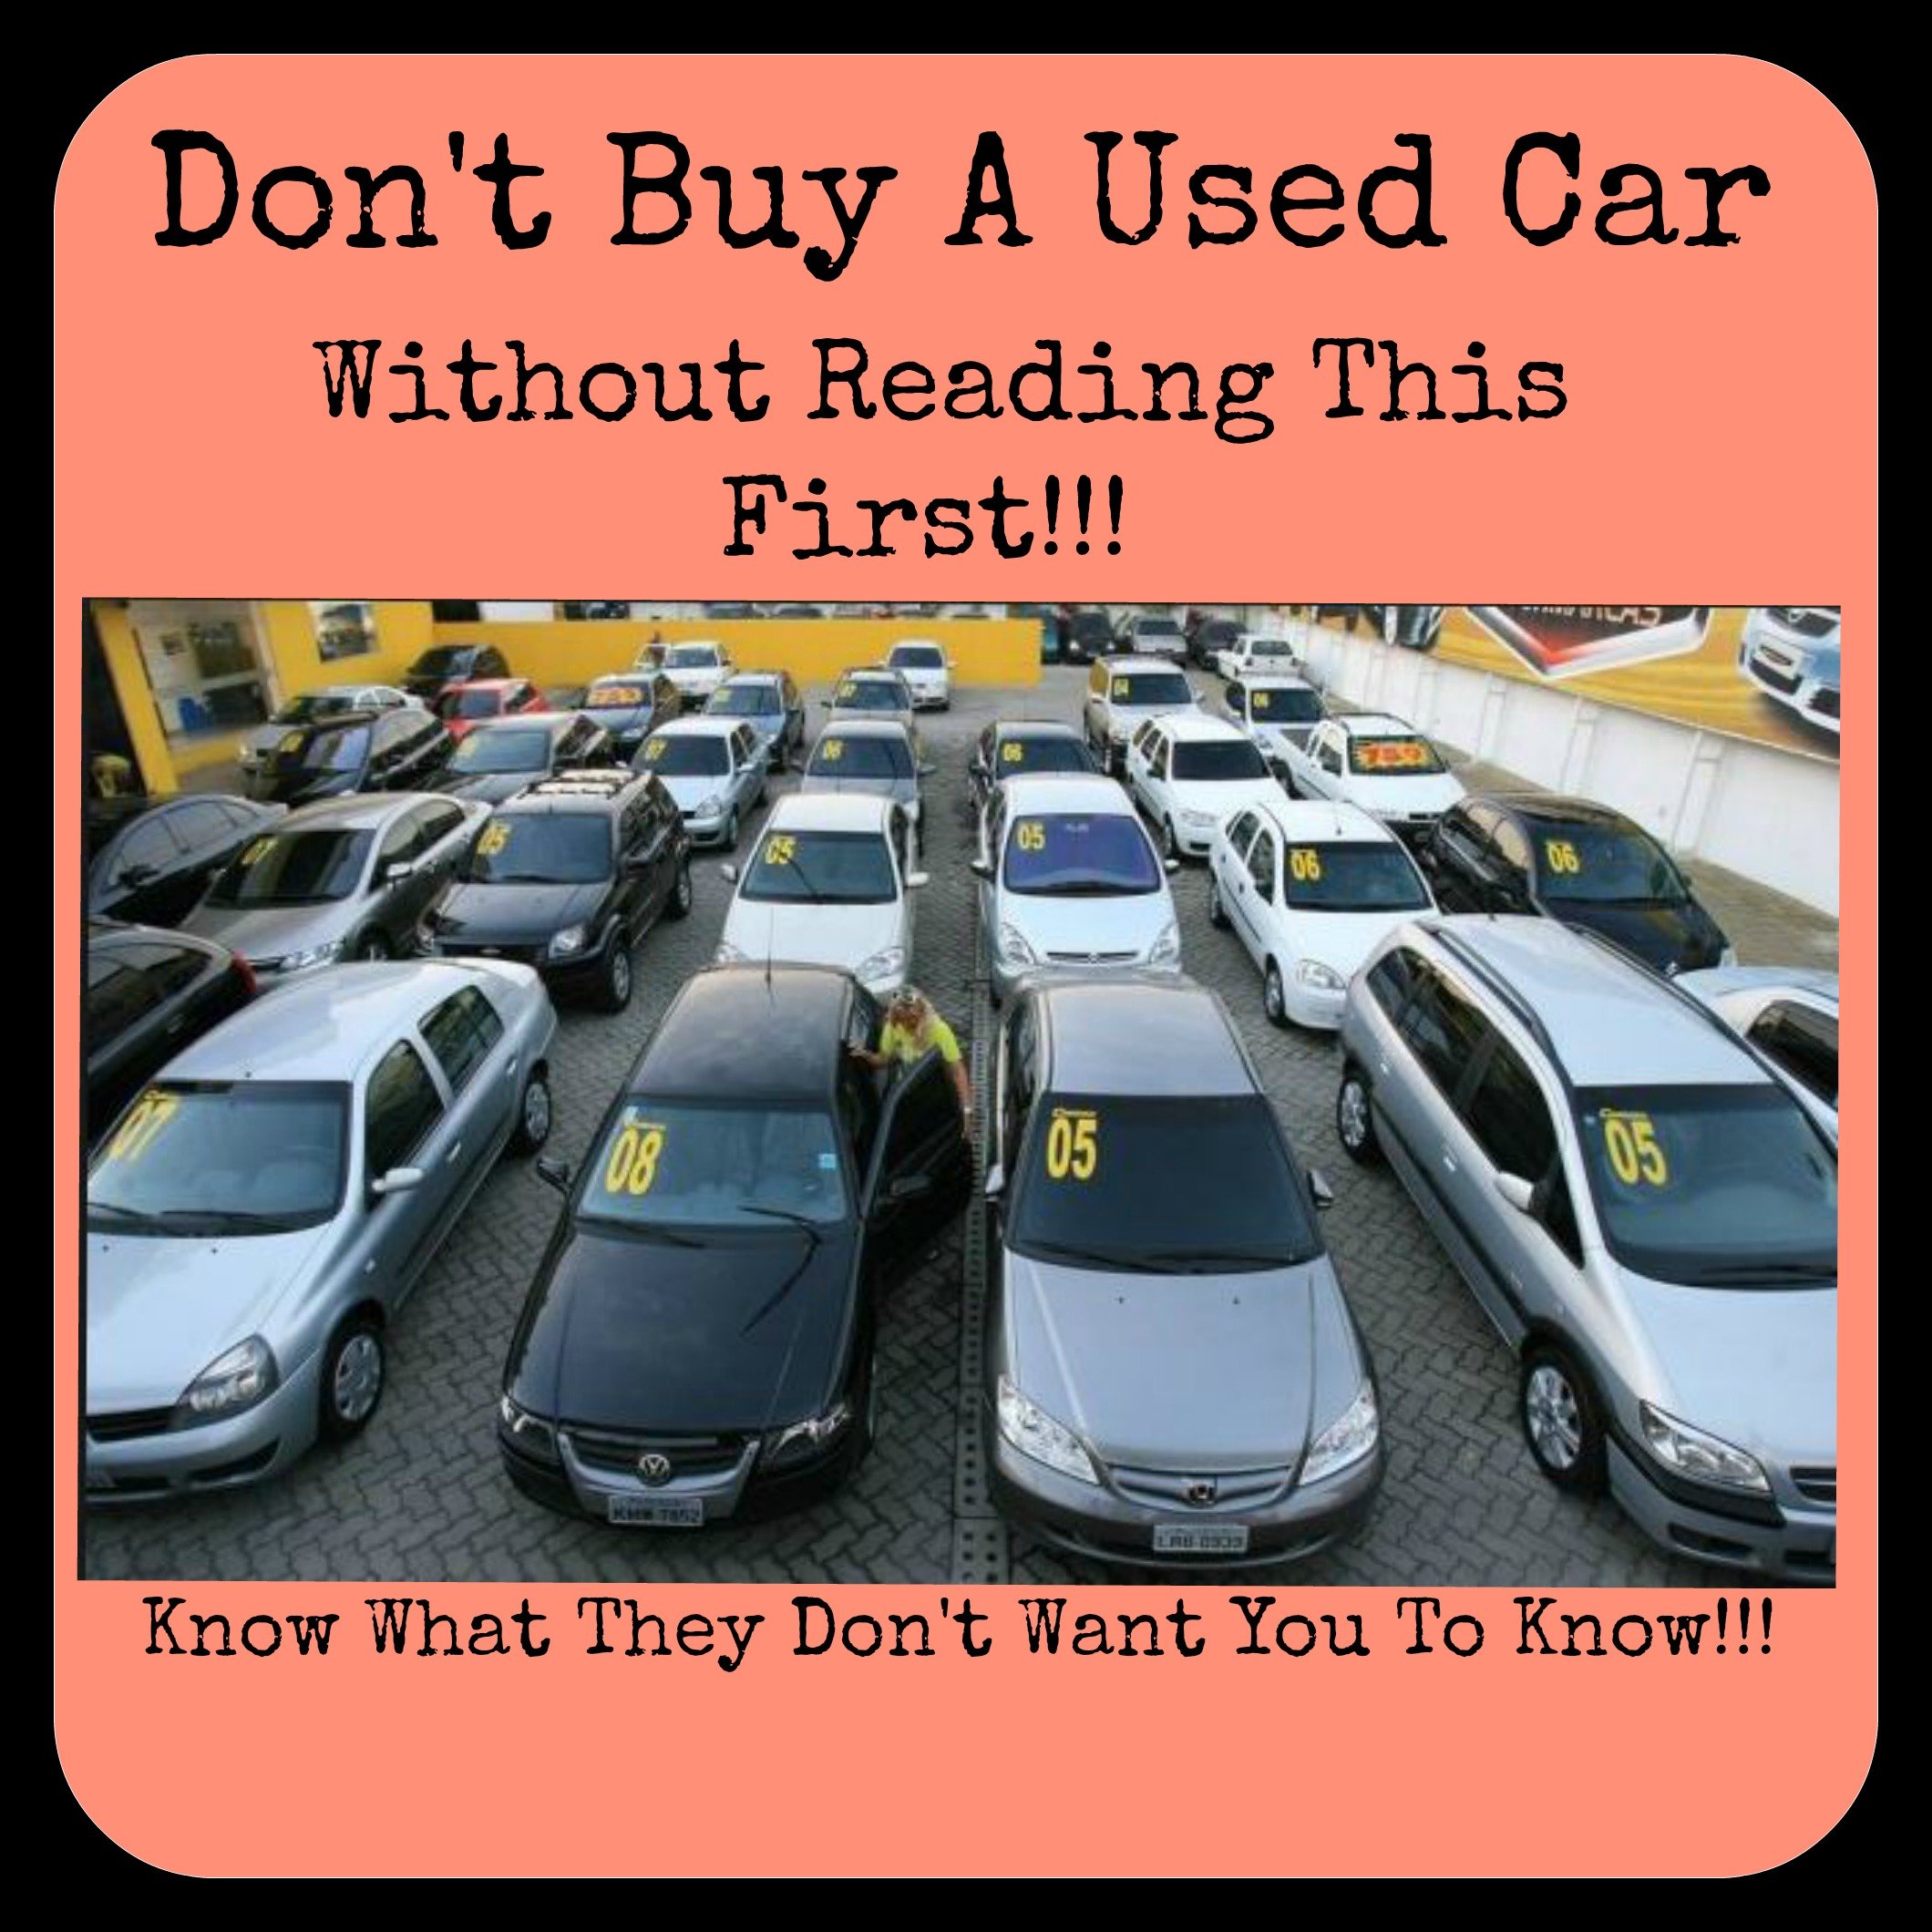 Don't Buy Another Used Car Without Reading This First